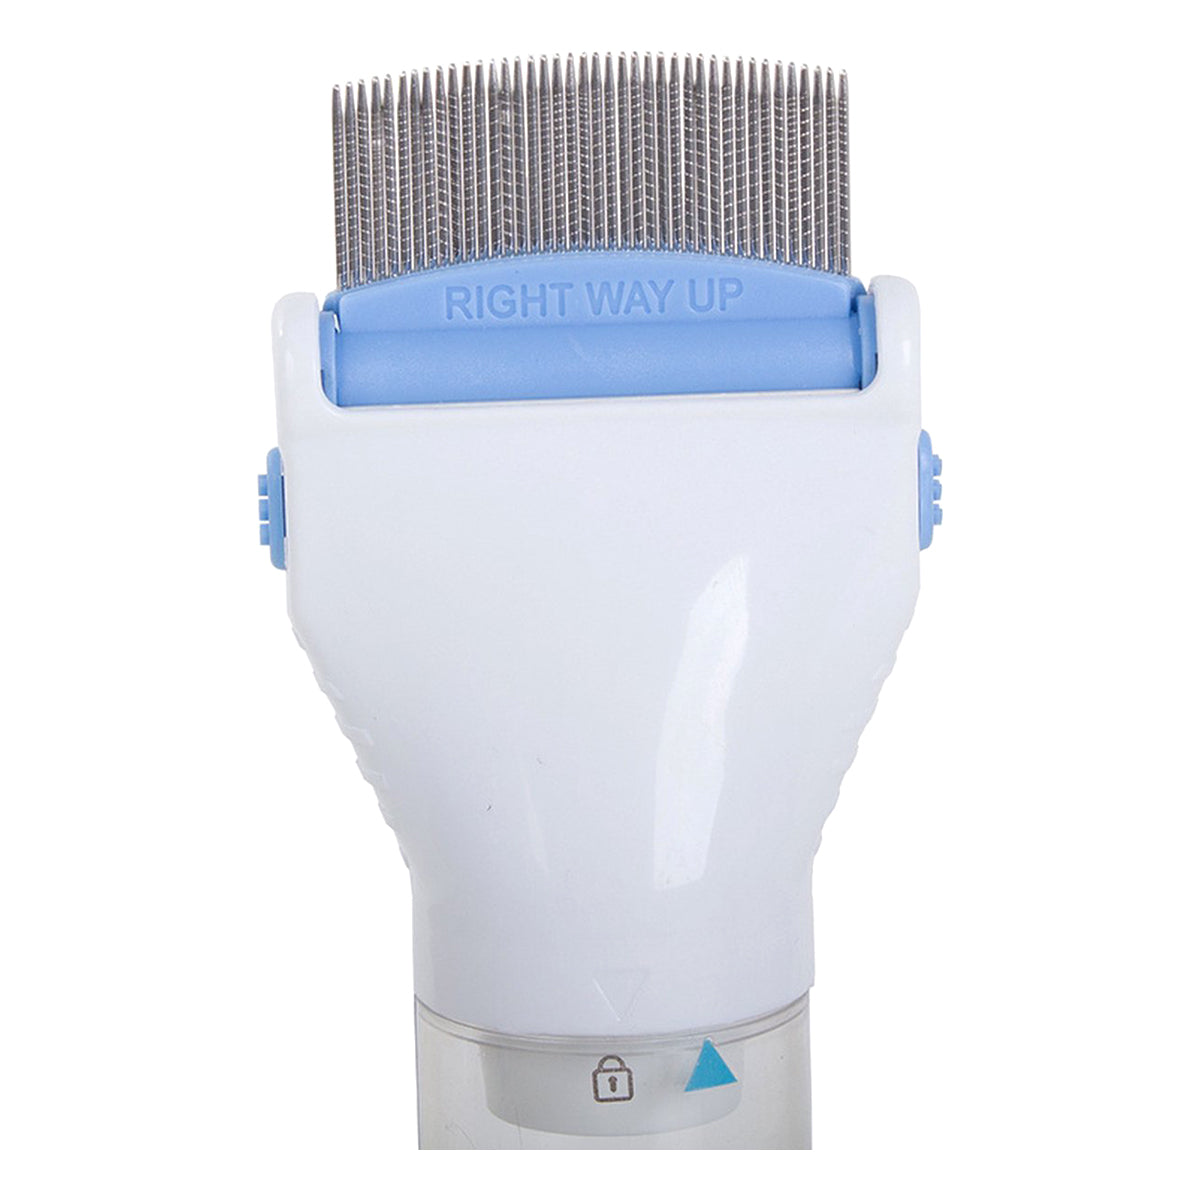 <tc>Ariko</tc>  Electric Lice Comb - With 2x Filter - Electric Lice Combs - Flea Comb - Including Cleaning Brush - Suitable for both humans and animals